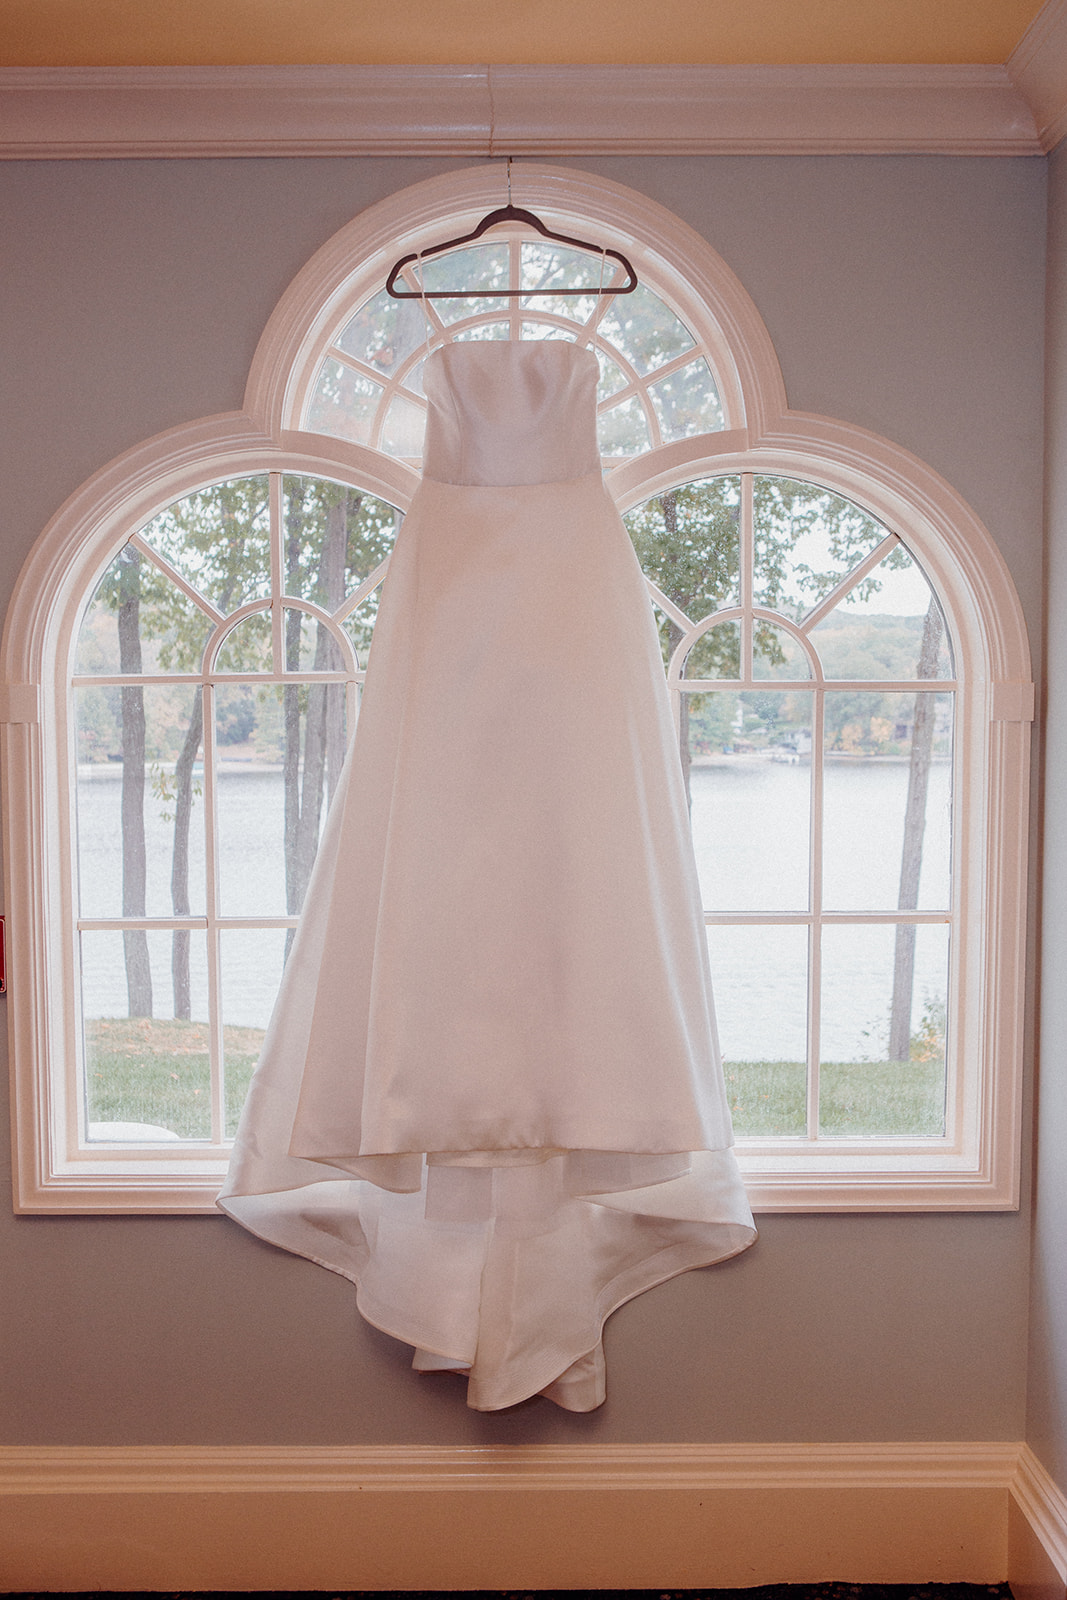 A bridal gown hanging in the window